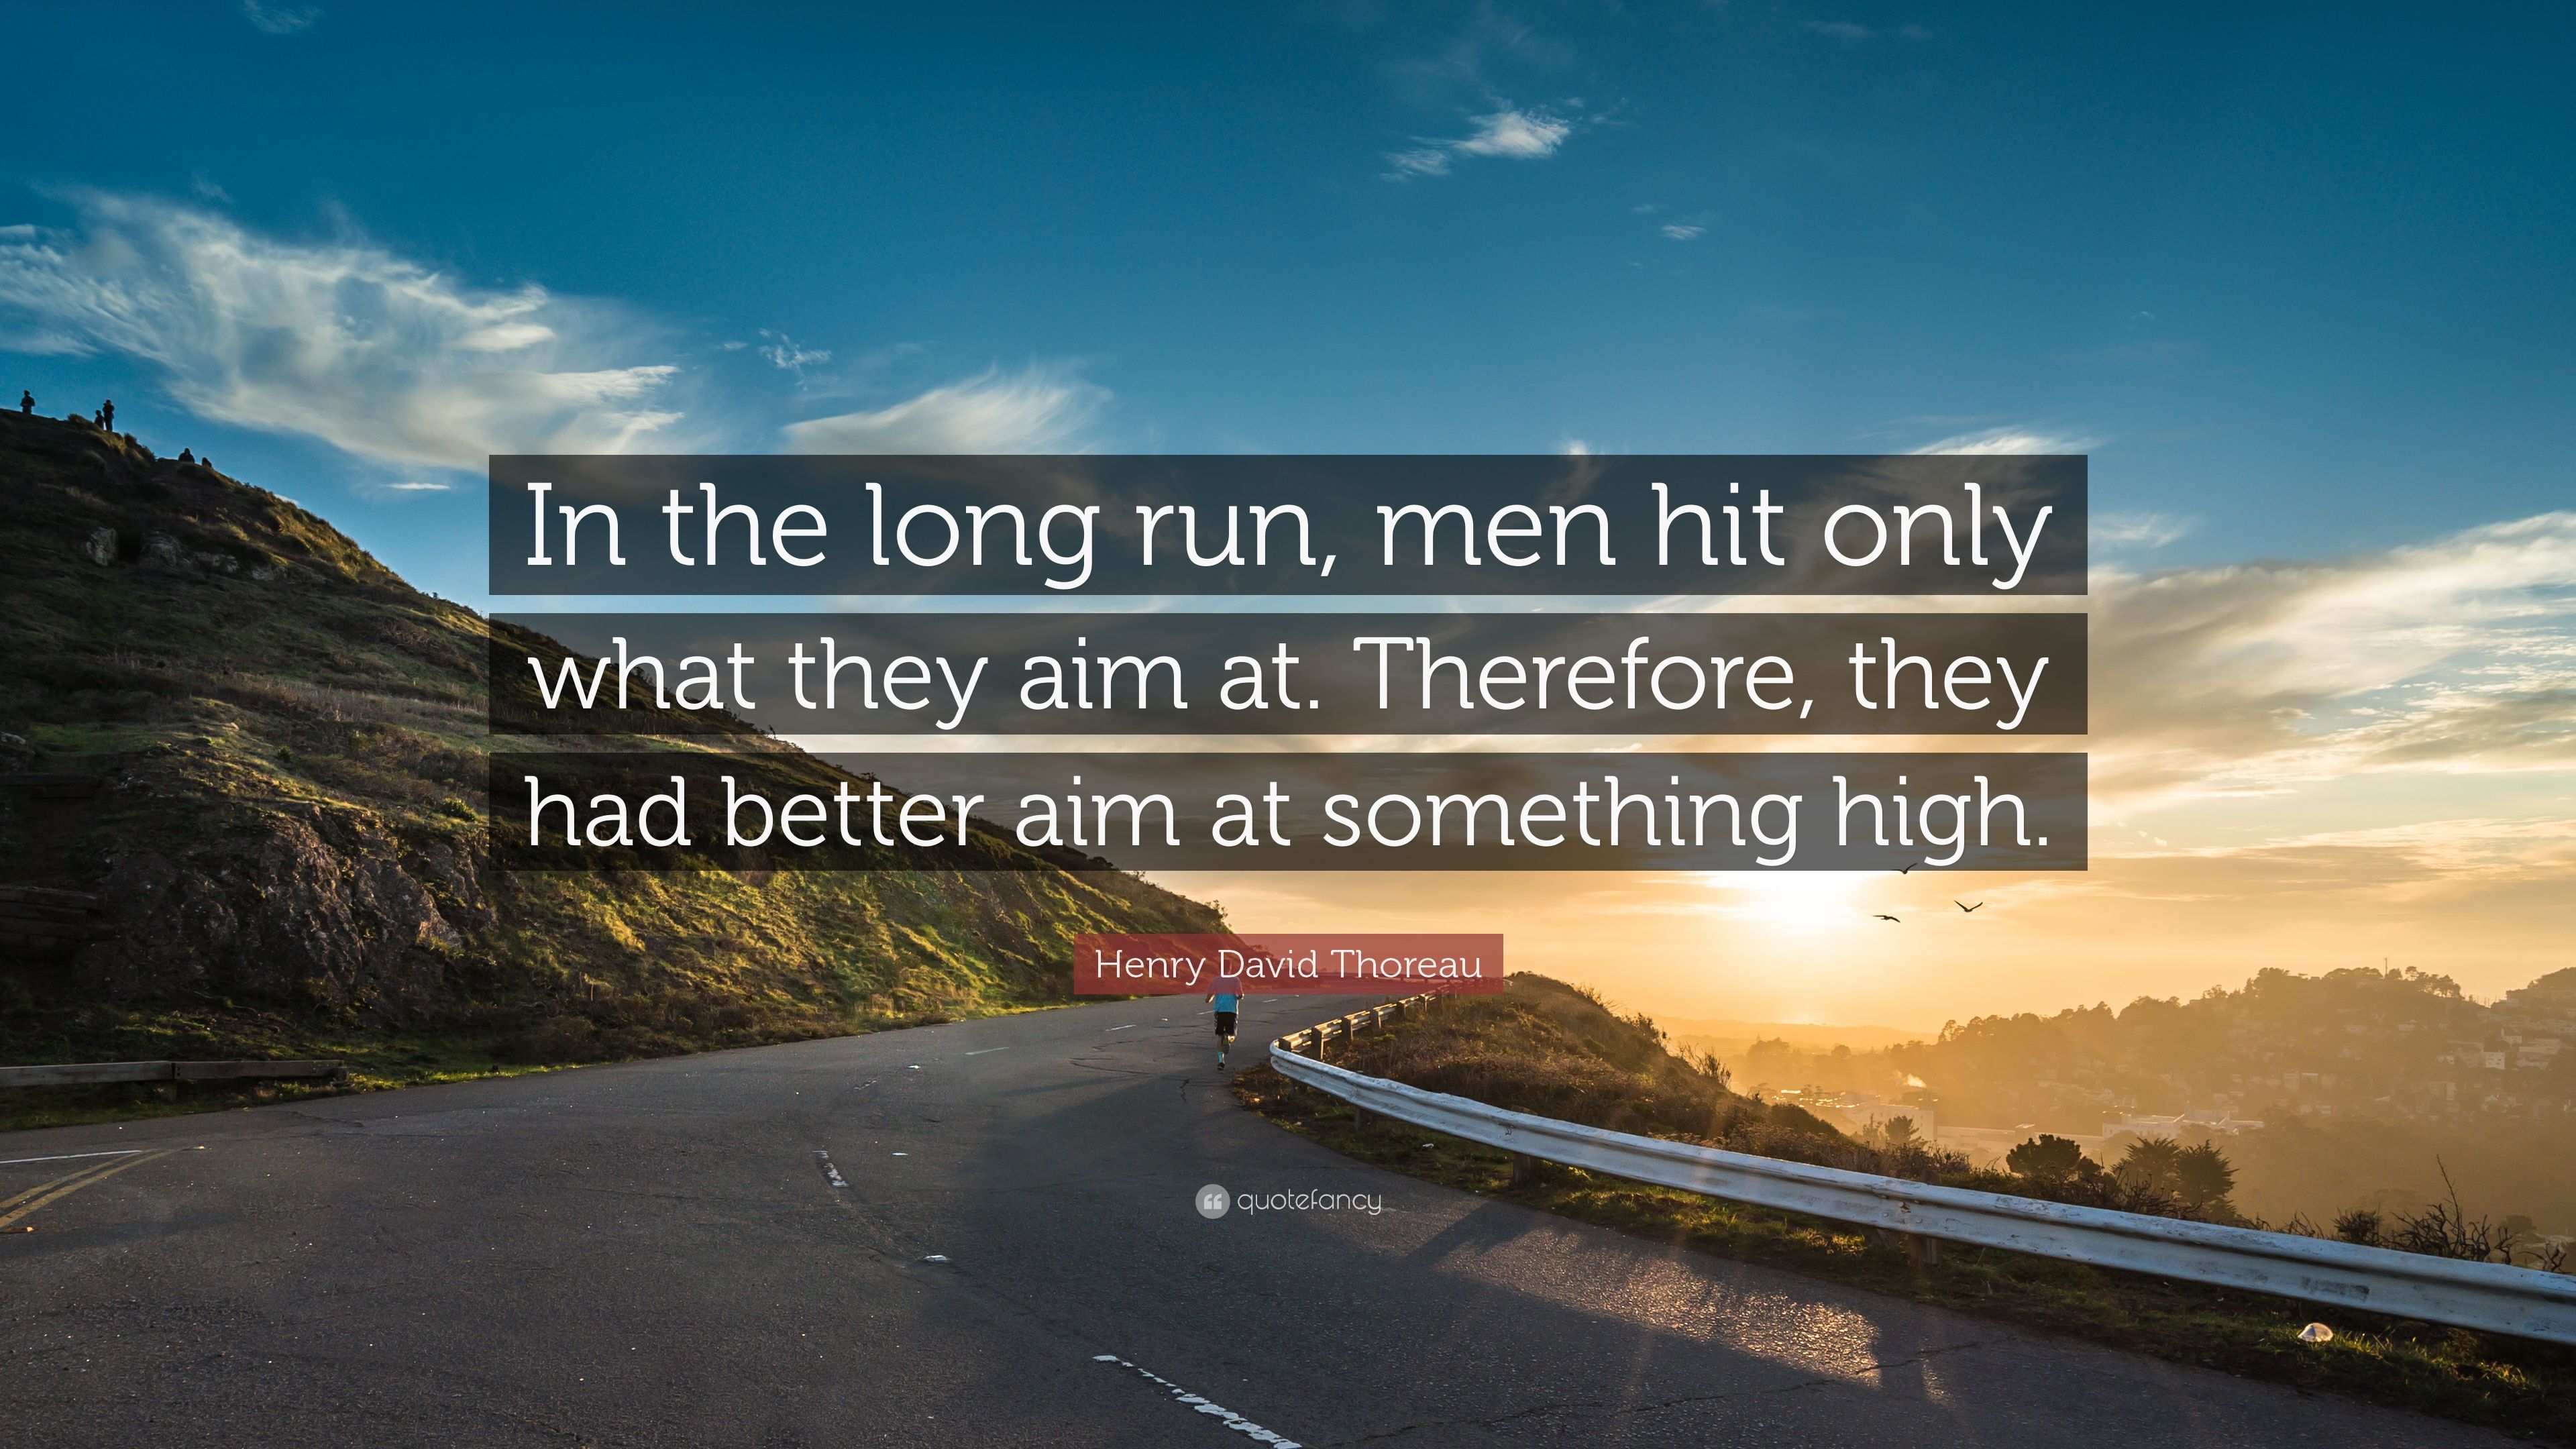 Henry David Thoreau Quote: “In the long run, men hit only what ...